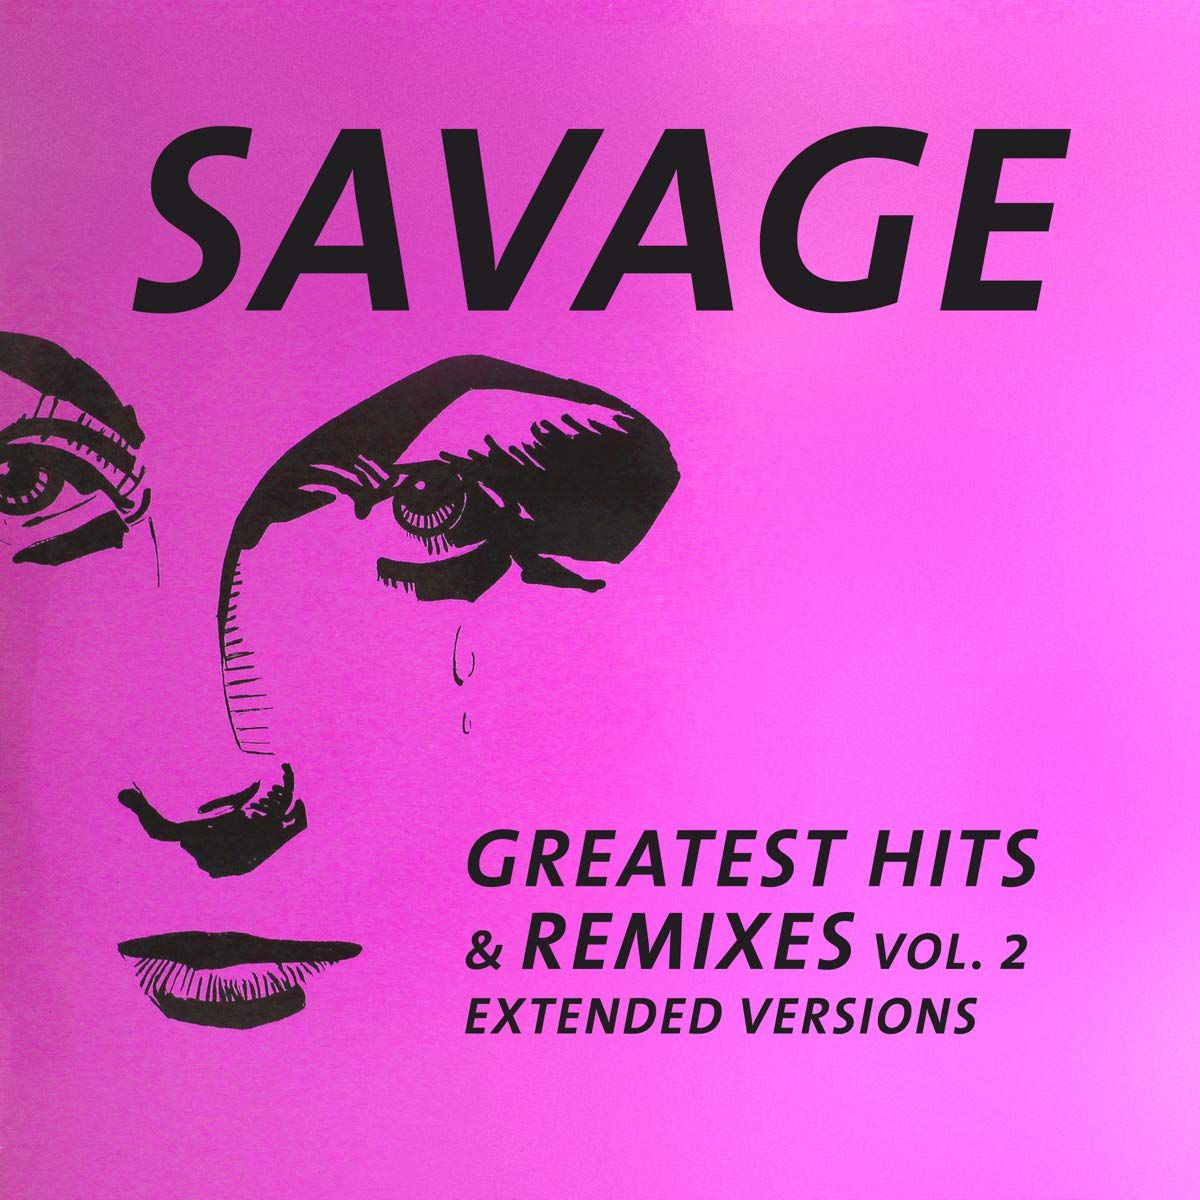 Savage – Greatest Hits & Remixes Vol. 2 [Extended Versions] (LP)